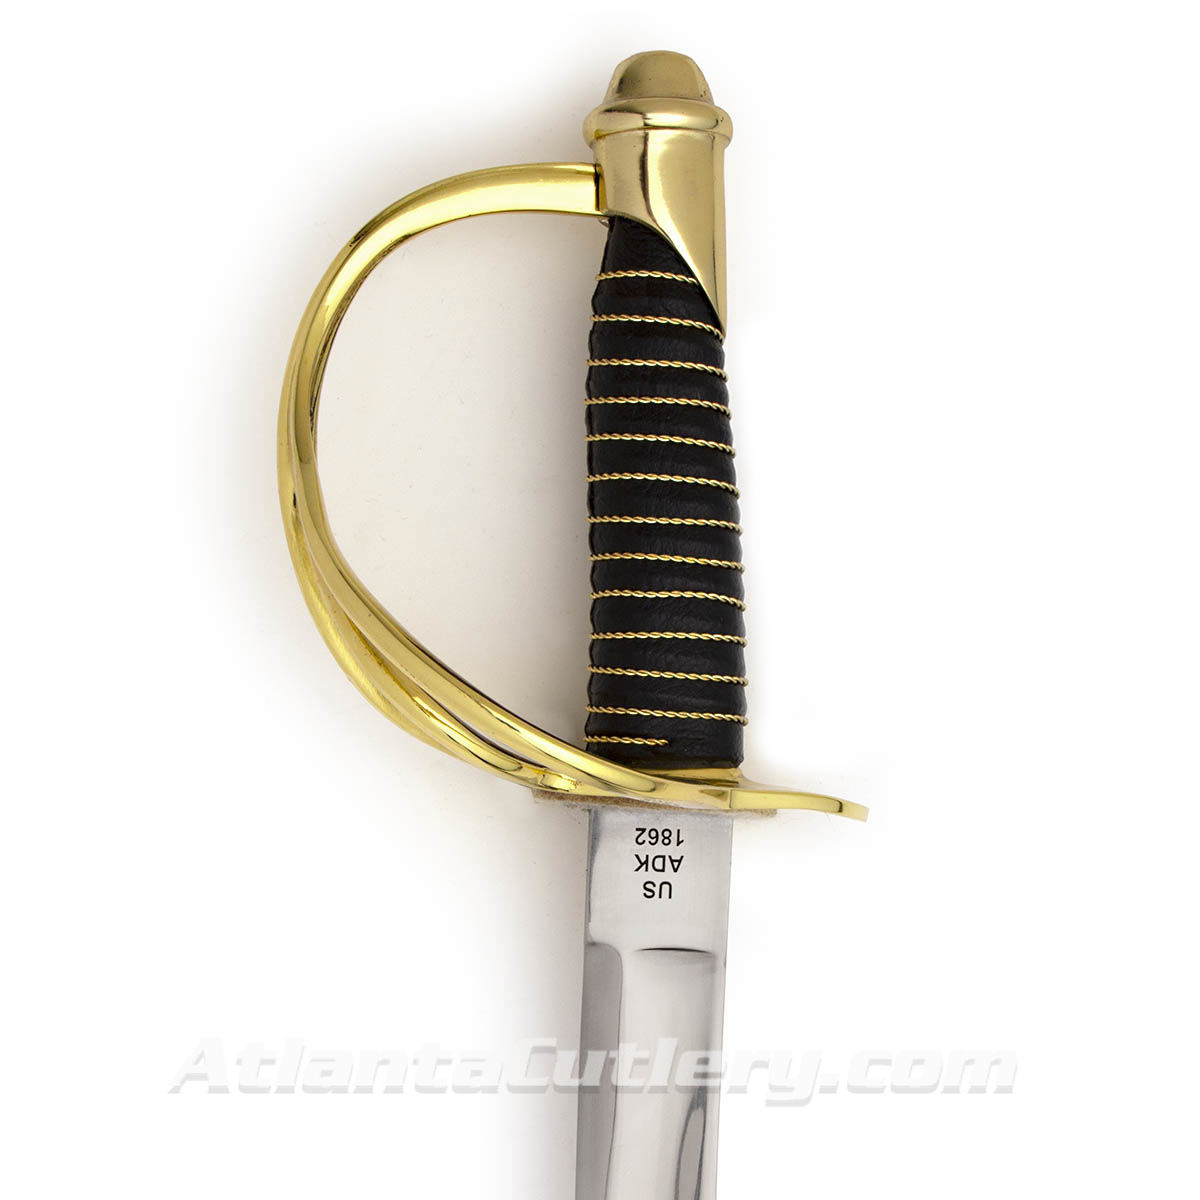 General Edge Swords U.S Model 1860 Light Cavalry Saber FREE SHIPPING IN USA